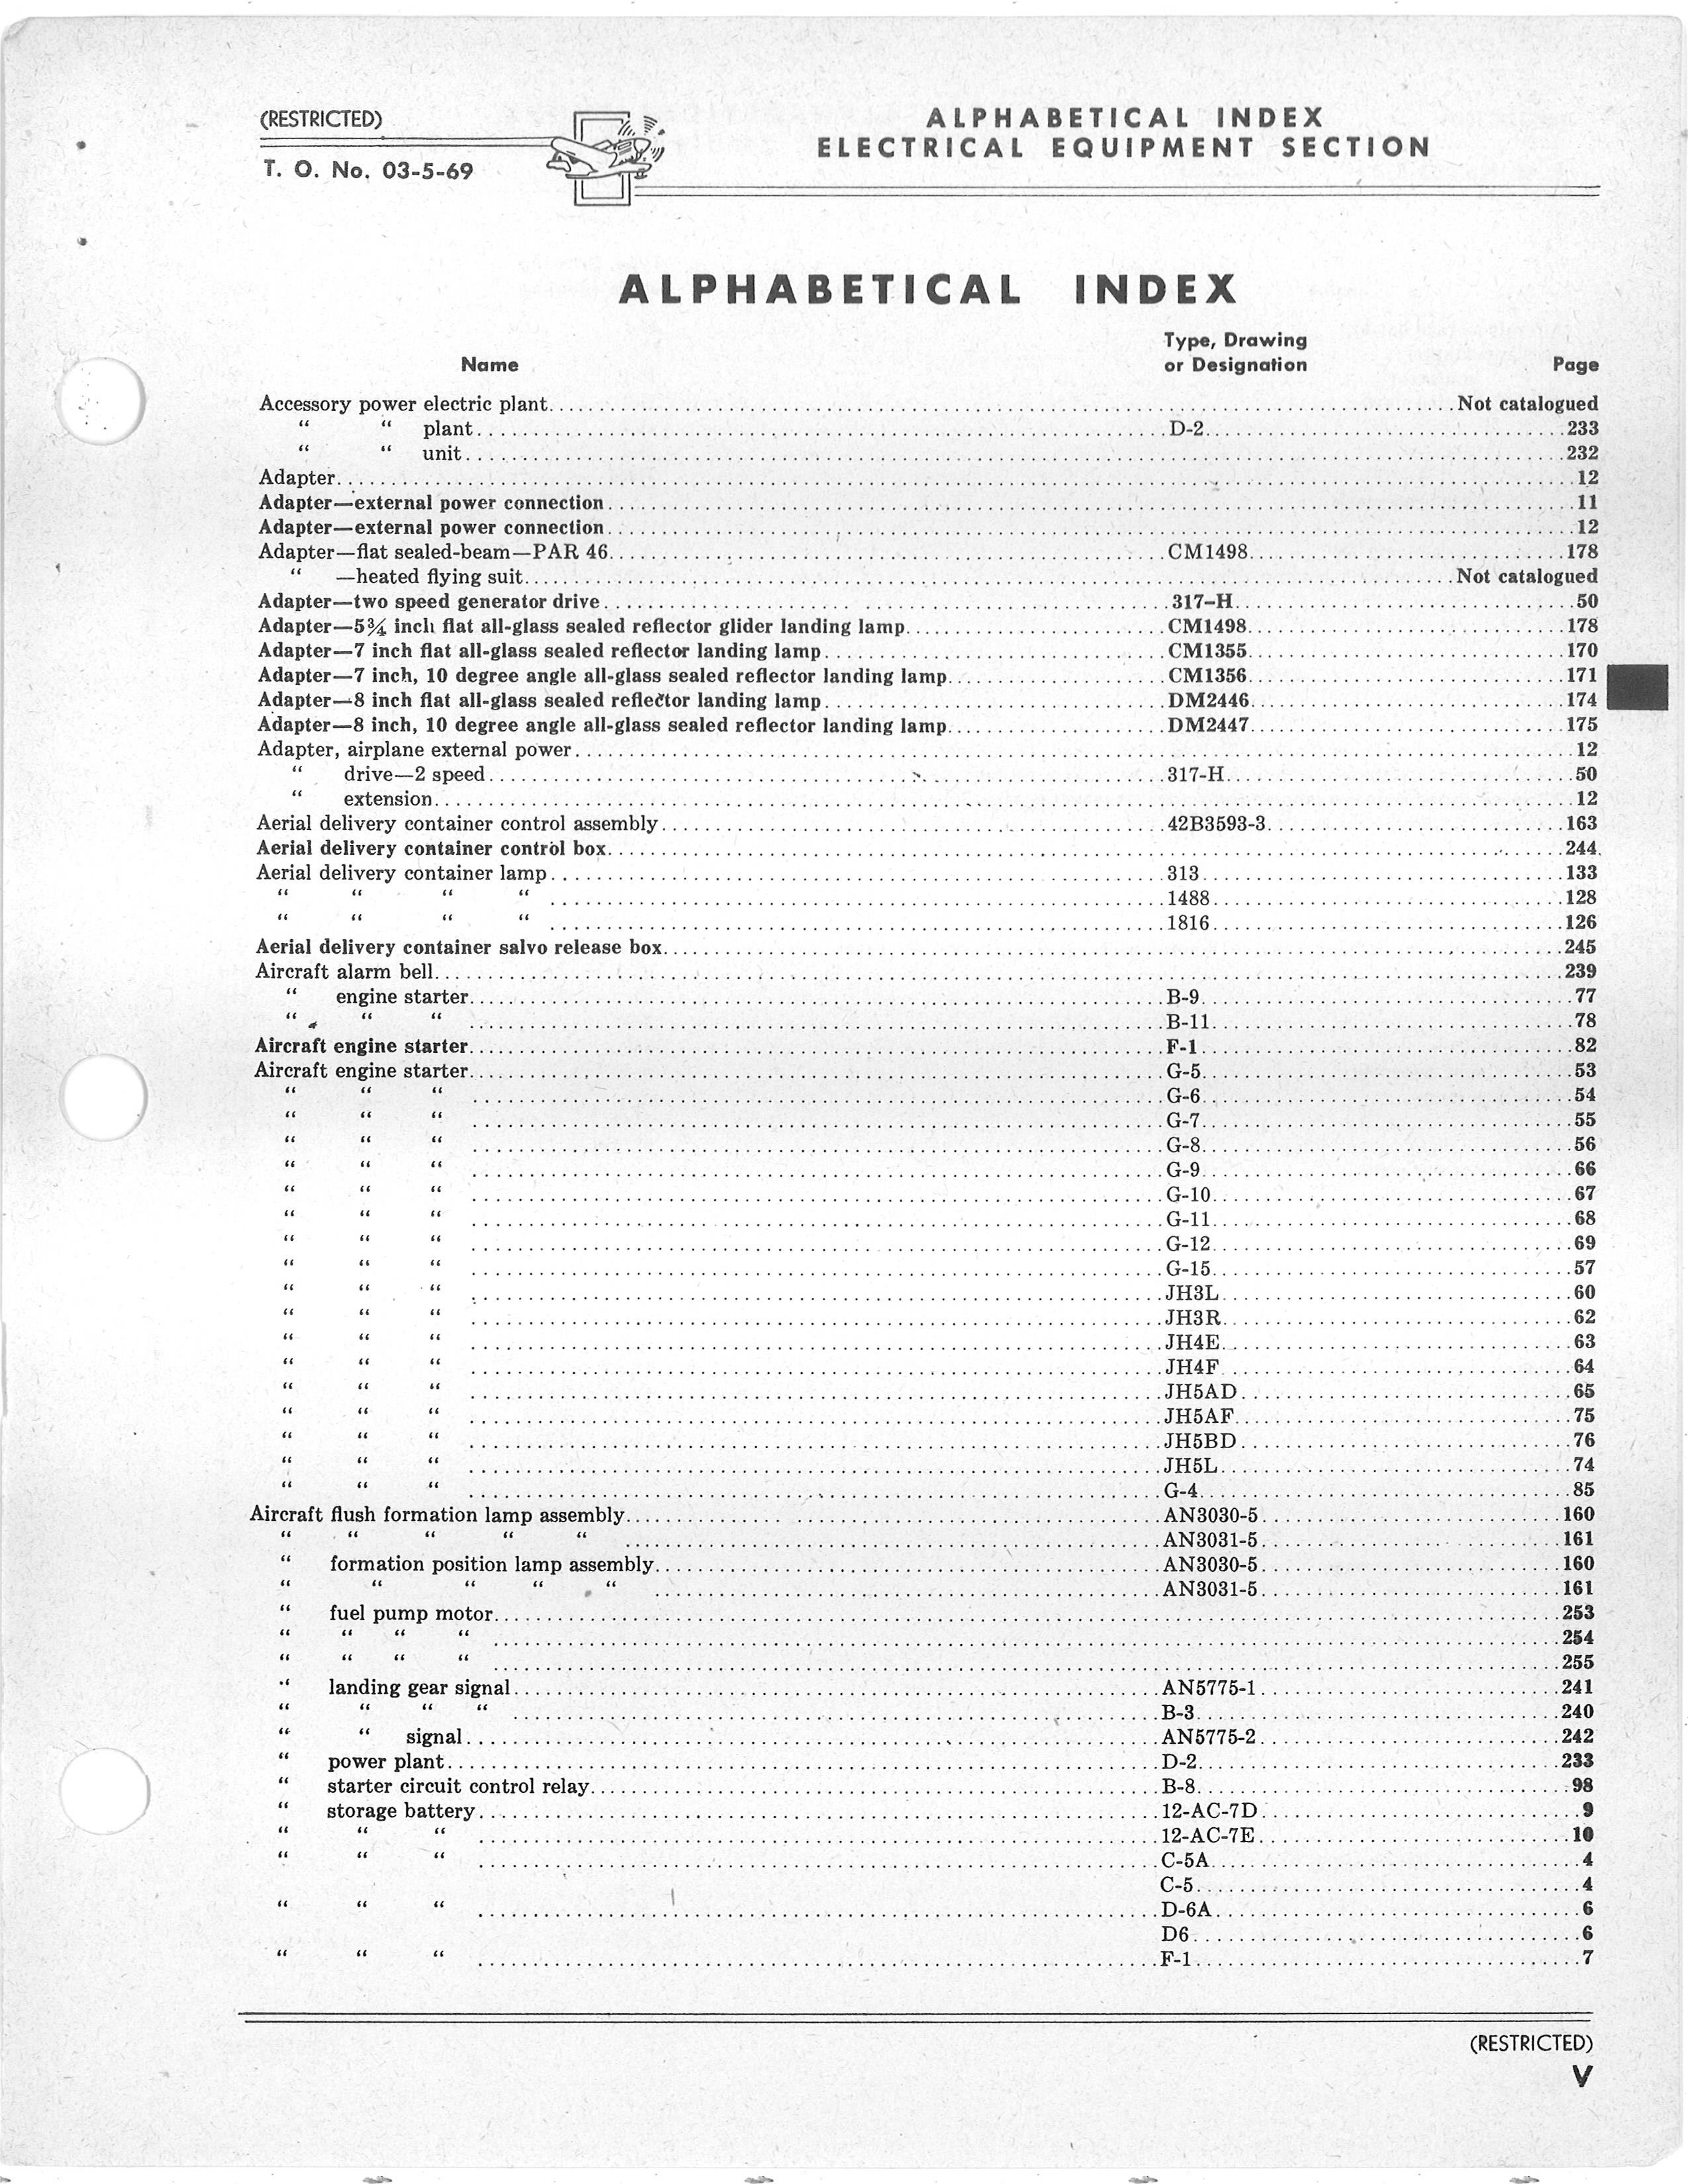 Sample page 7 from AirCorps Library document: Index of Army Navy Electrical, Aeronautical Equipment